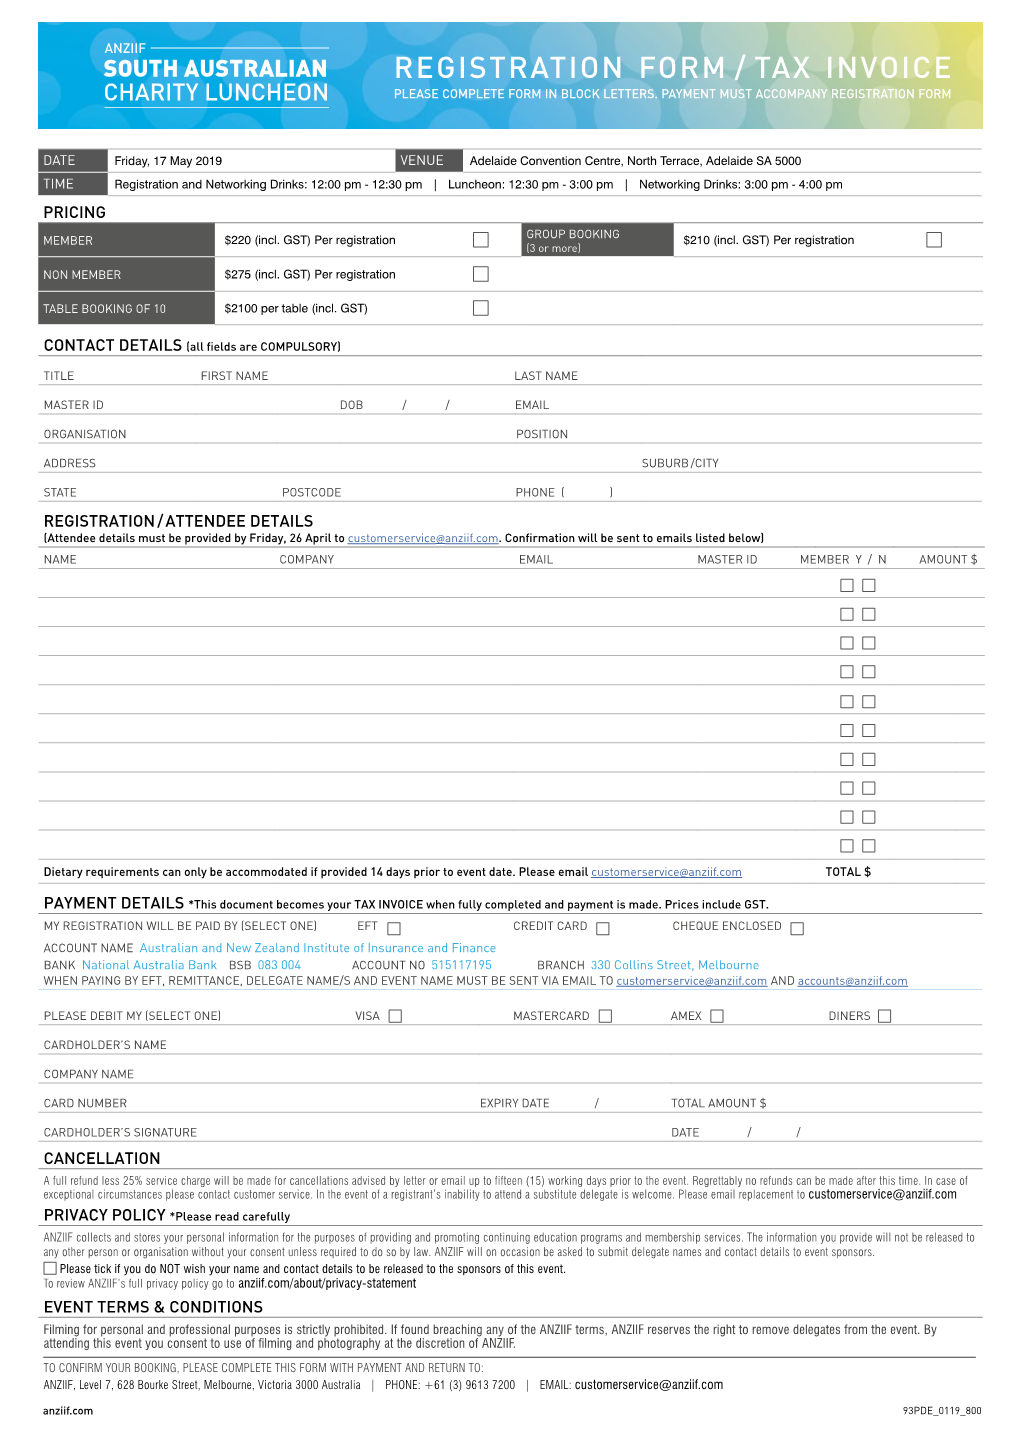 Registration Form / Tax Invoice Please Complete Form in Block Letters